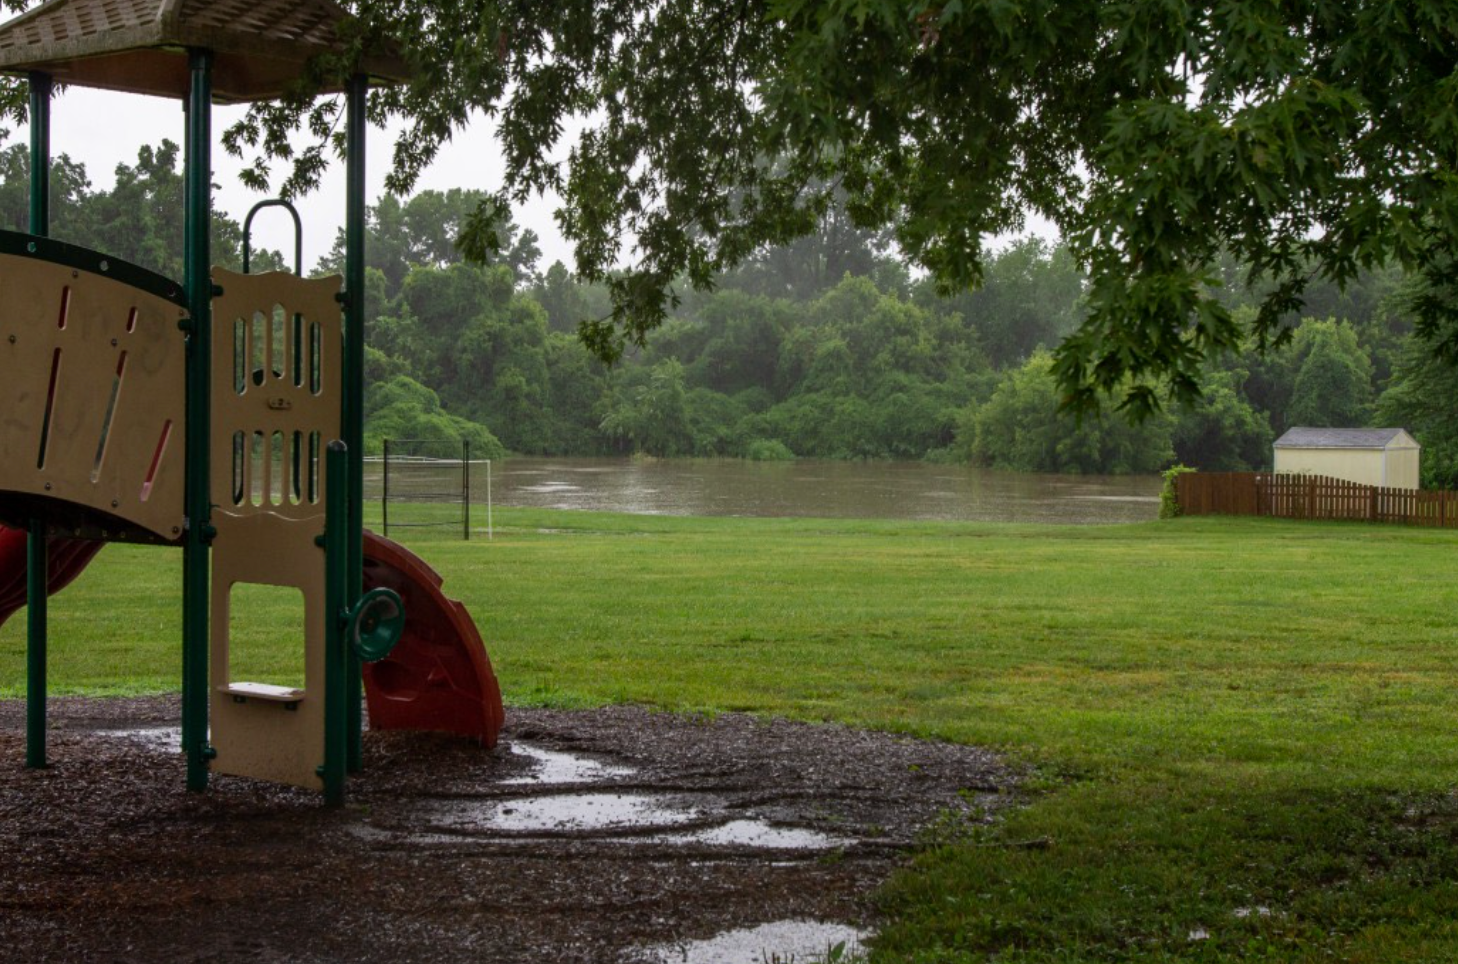 Coldwater Creek flooding into the grounds of Jana Elementary School in Florissant, Missouri